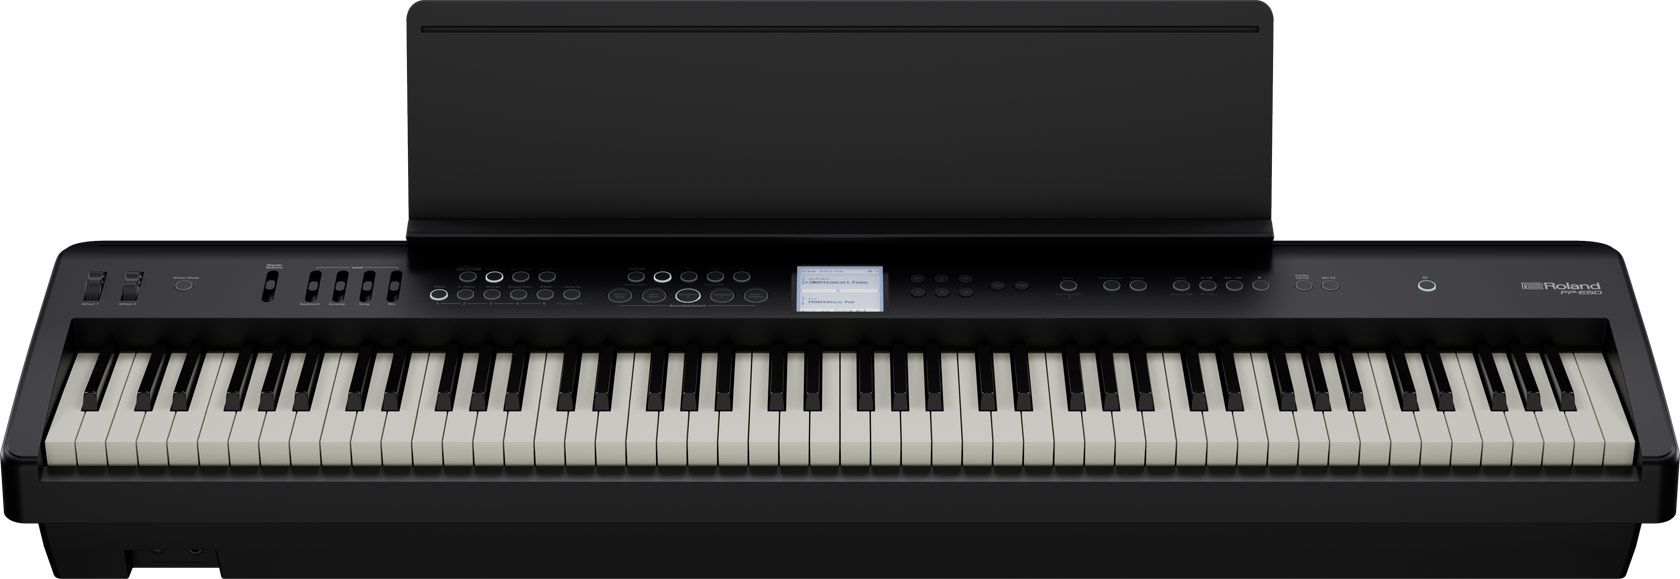 FP-E50 Entertainer Stagepiano